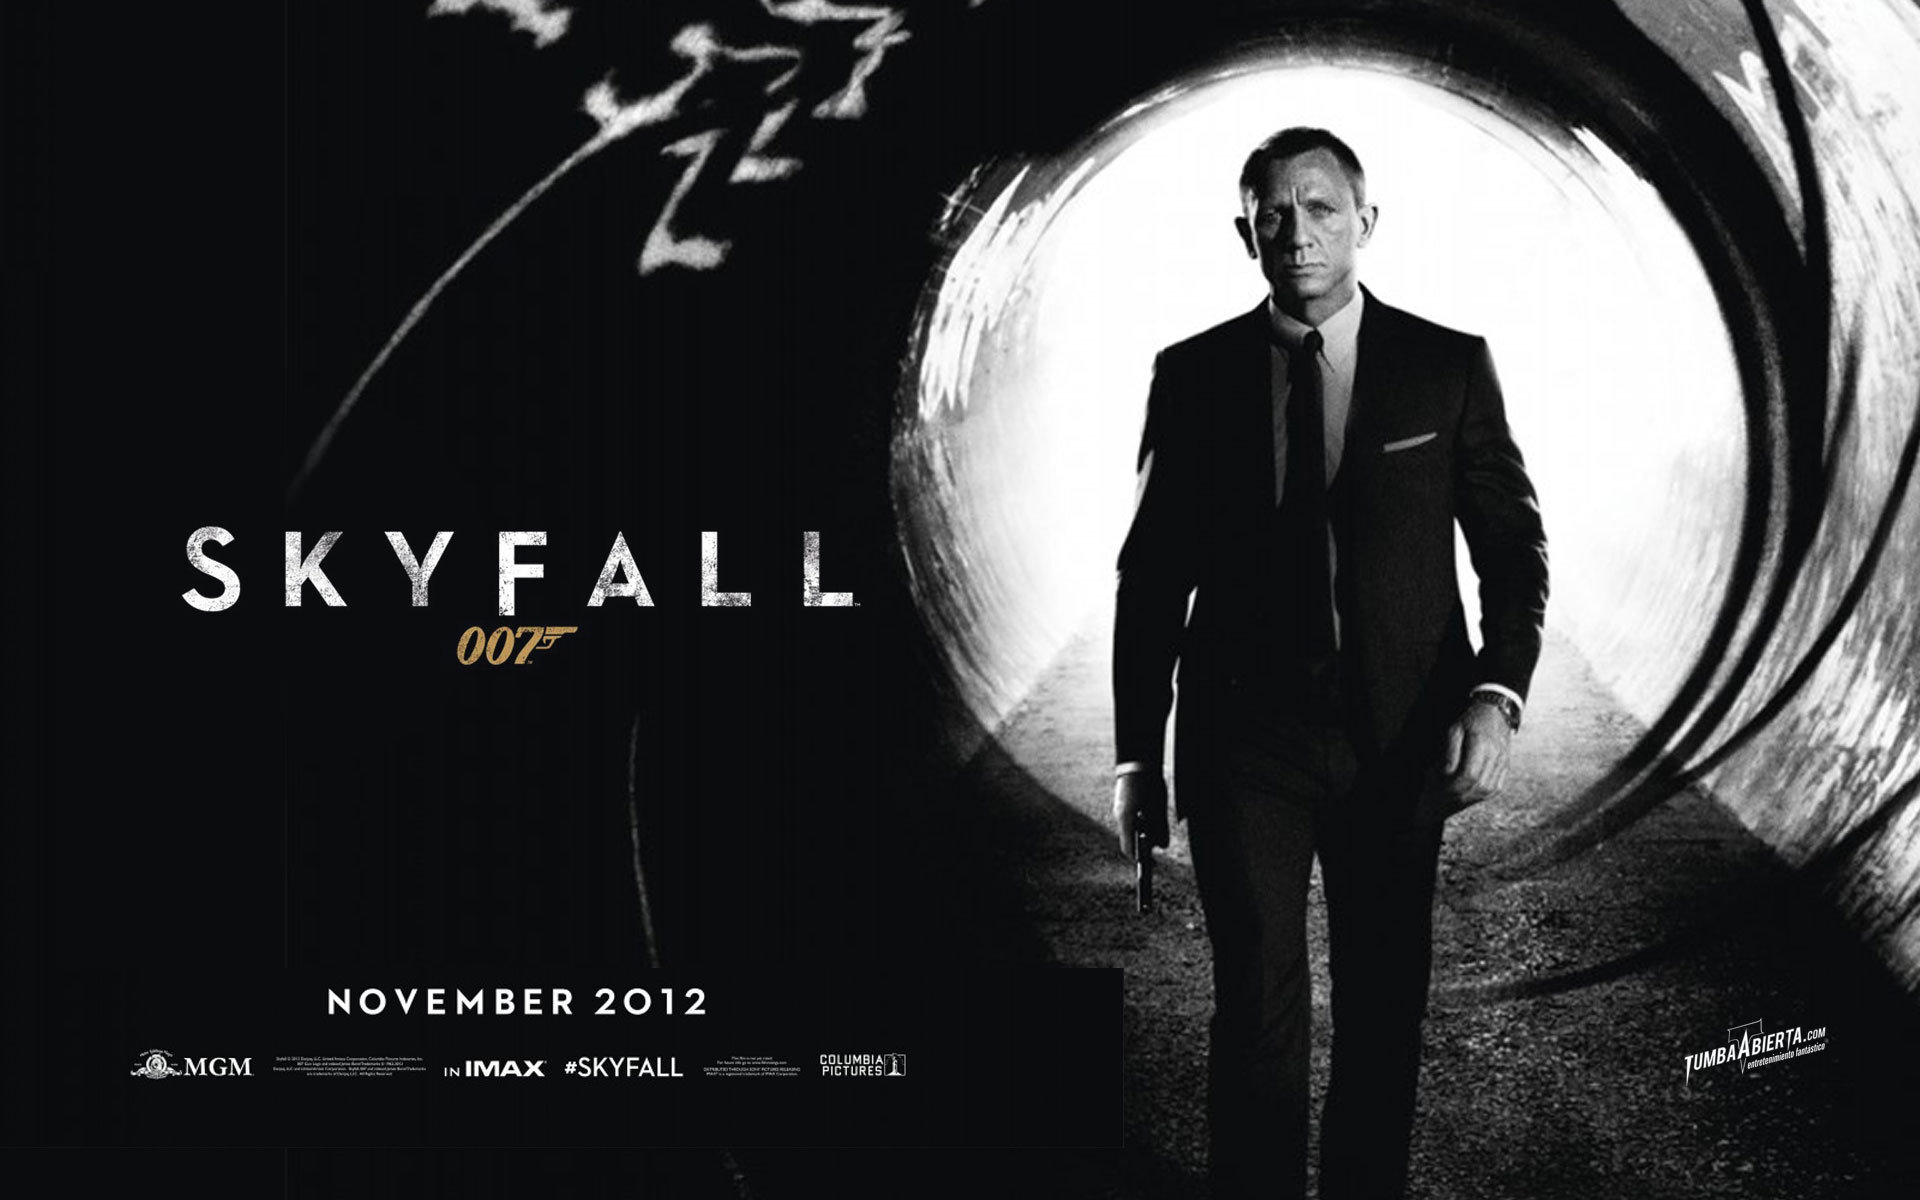 50 Facts about the movie Skyfall - Facts.net